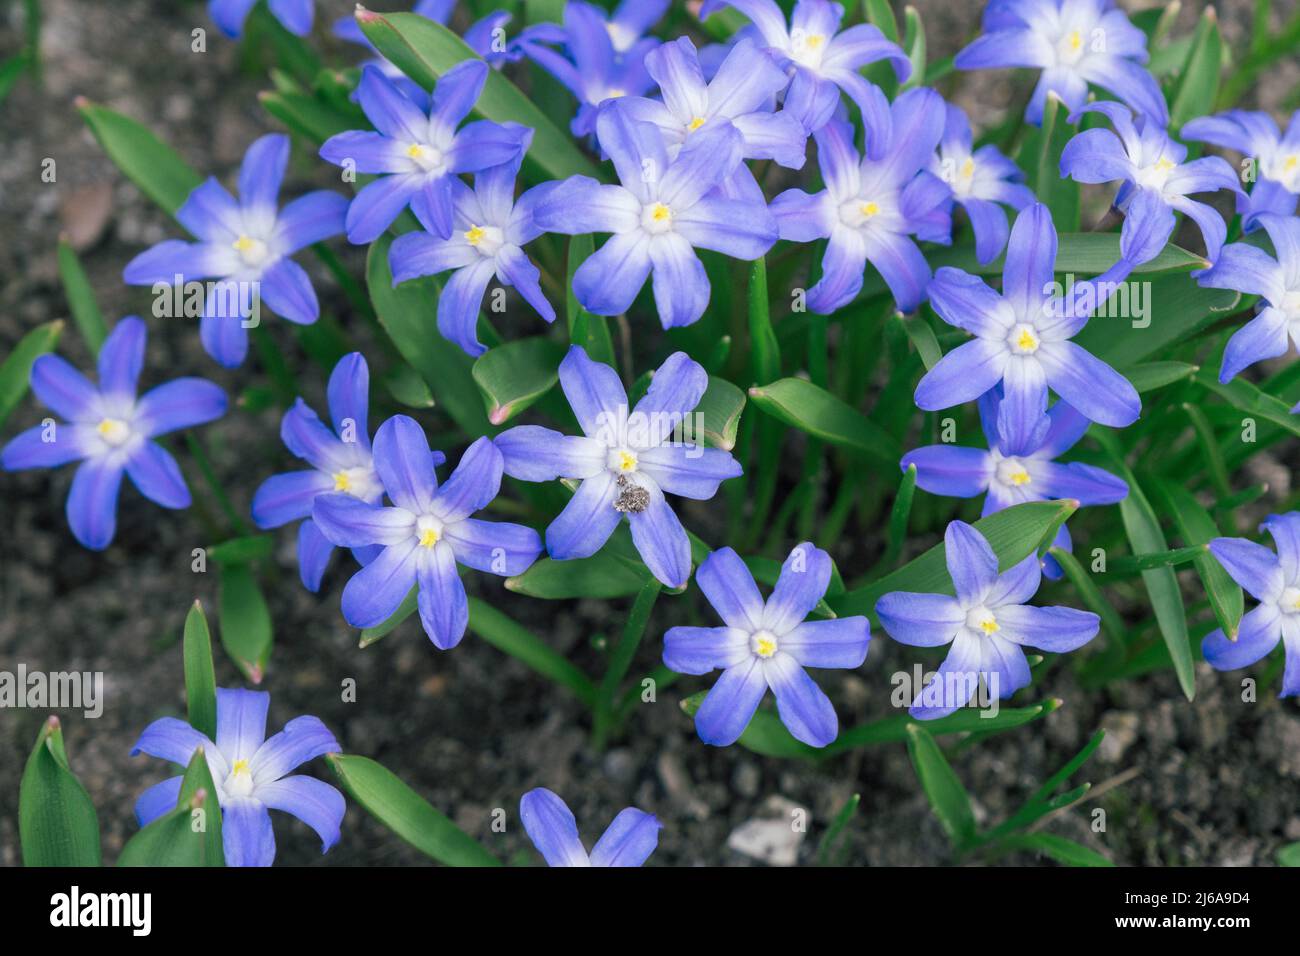 Glory-of-the-Snow also known as Chionodoxa forbesii is a blue star shape spring flower. Blurred background. Selective focus. Stock Photo